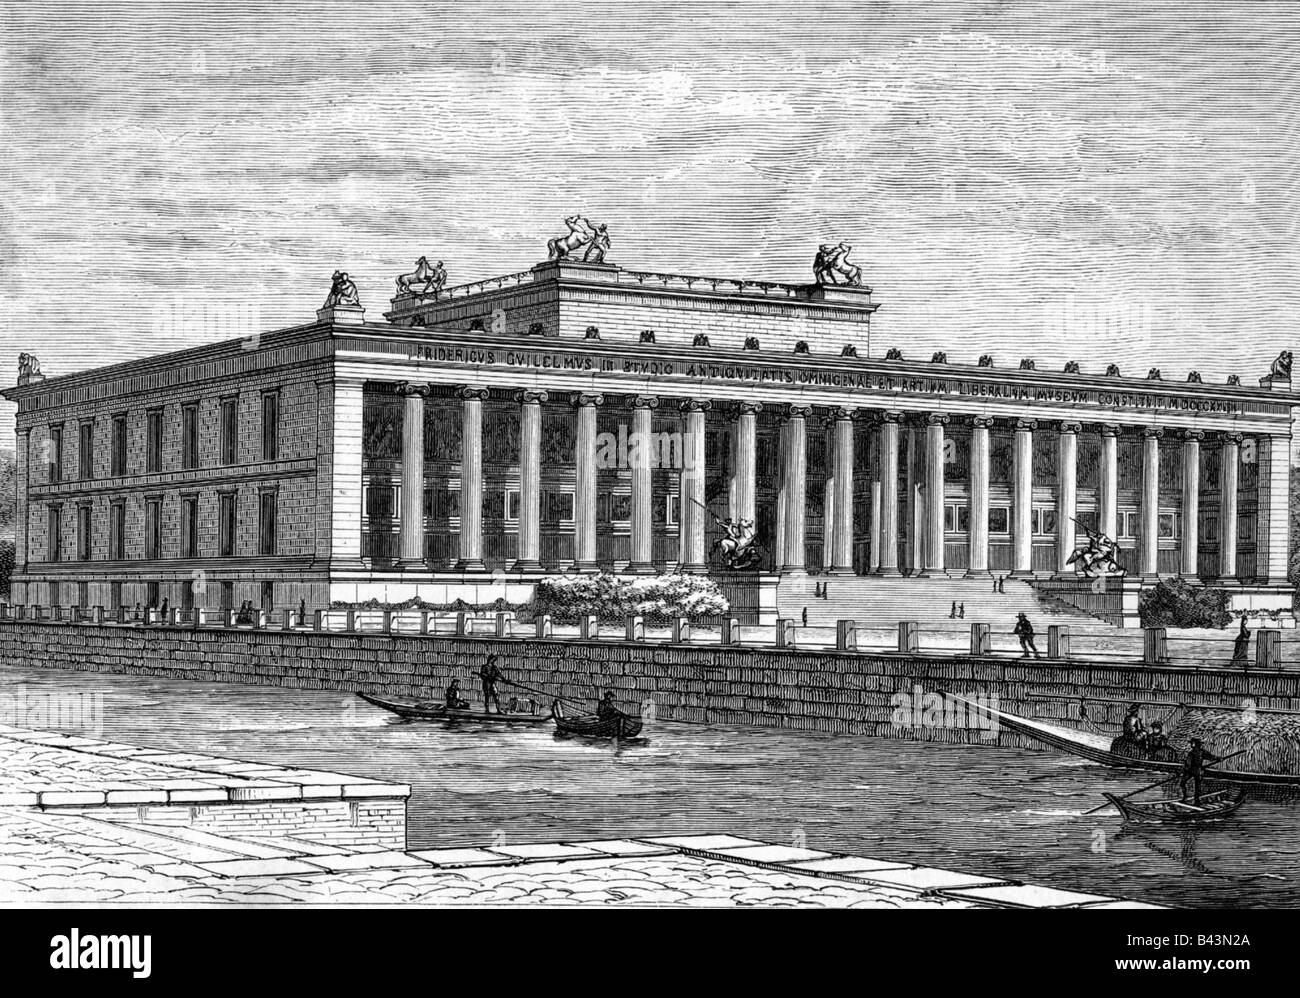 geography/travel, Germany, Berlin, museums, Altes Museum, built 1825 - 1828 by Karl Friedrich Schinkel, engraving, 19th century, Old Museum, neoclassical, architecture, historic, historical, UNESCO World Cultural Heritage Site, people, Stock Photo